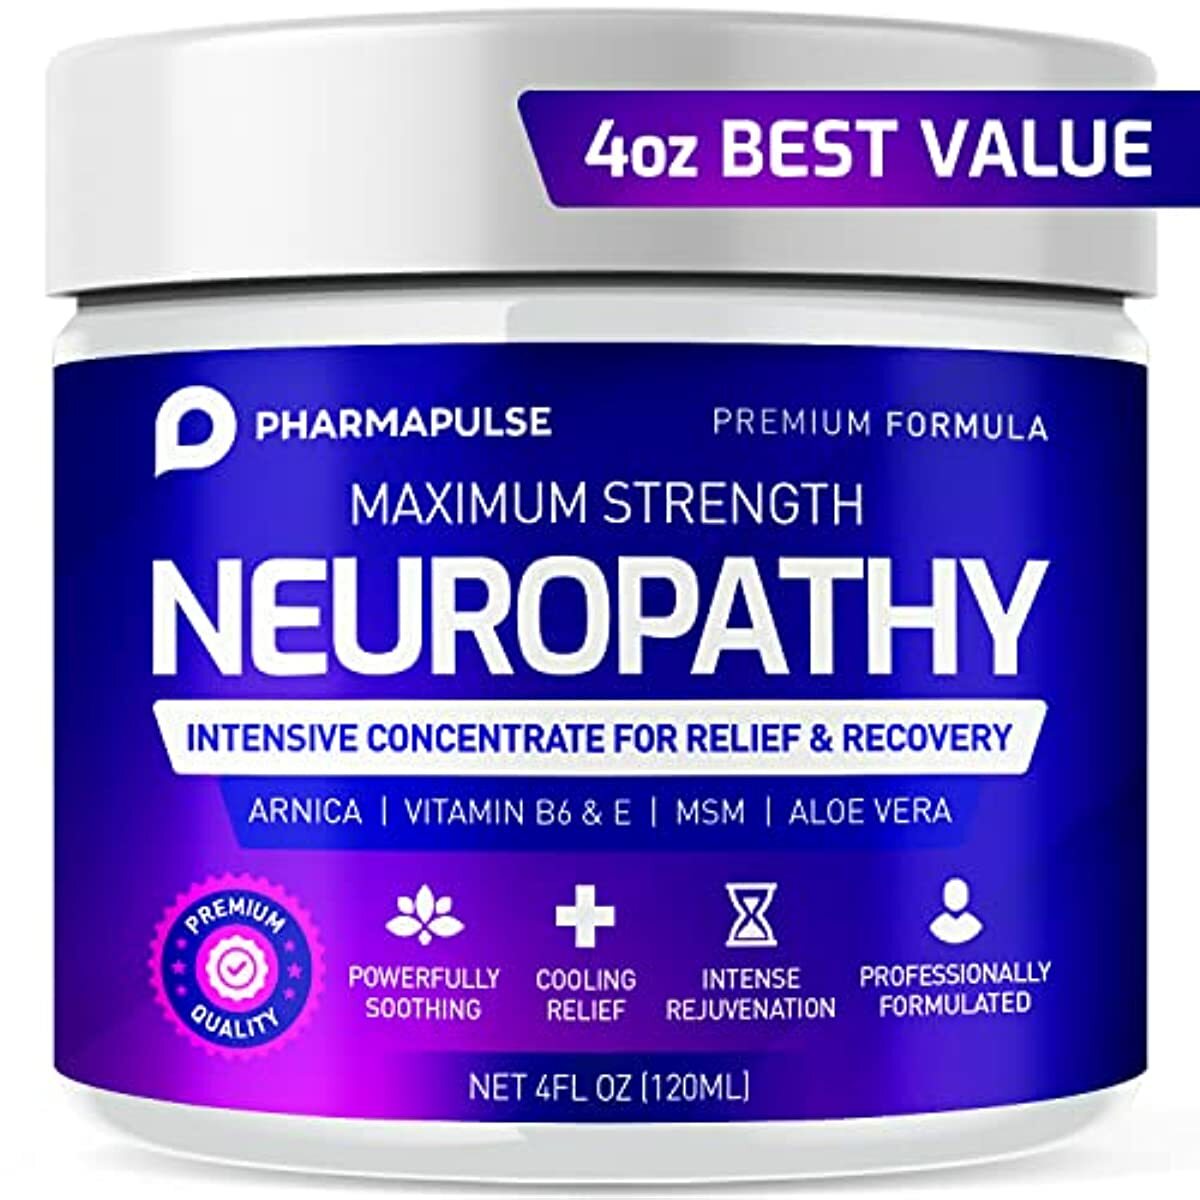 Neuropathy Nerve & Pain Relief Cream – Maximum Strength Pain Cream for Feet, Hands, Legs, Toes Includes Arnica, Vitamin B6, Aloe Vera, MSM - Scientifically Developed for Effective Relief 2oz